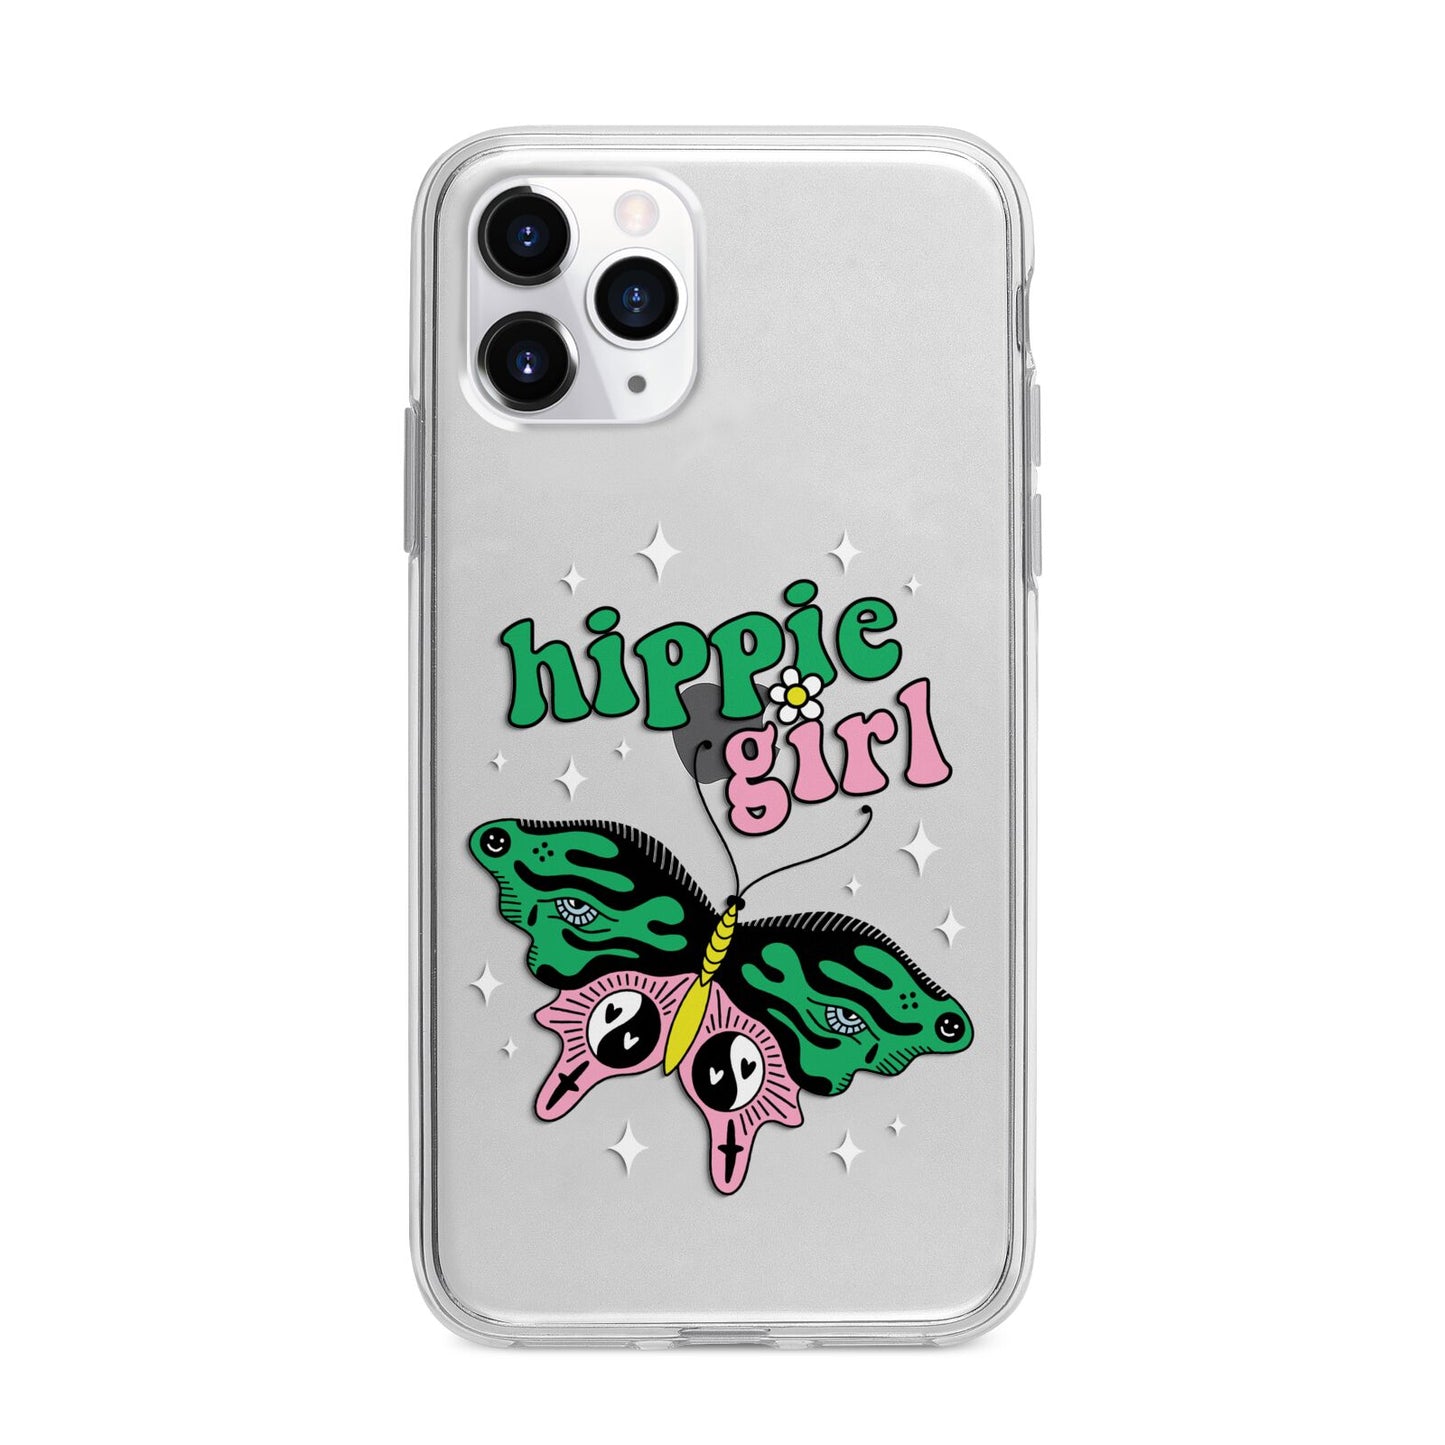 Hippie Girl Apple iPhone 11 Pro Max in Silver with Bumper Case